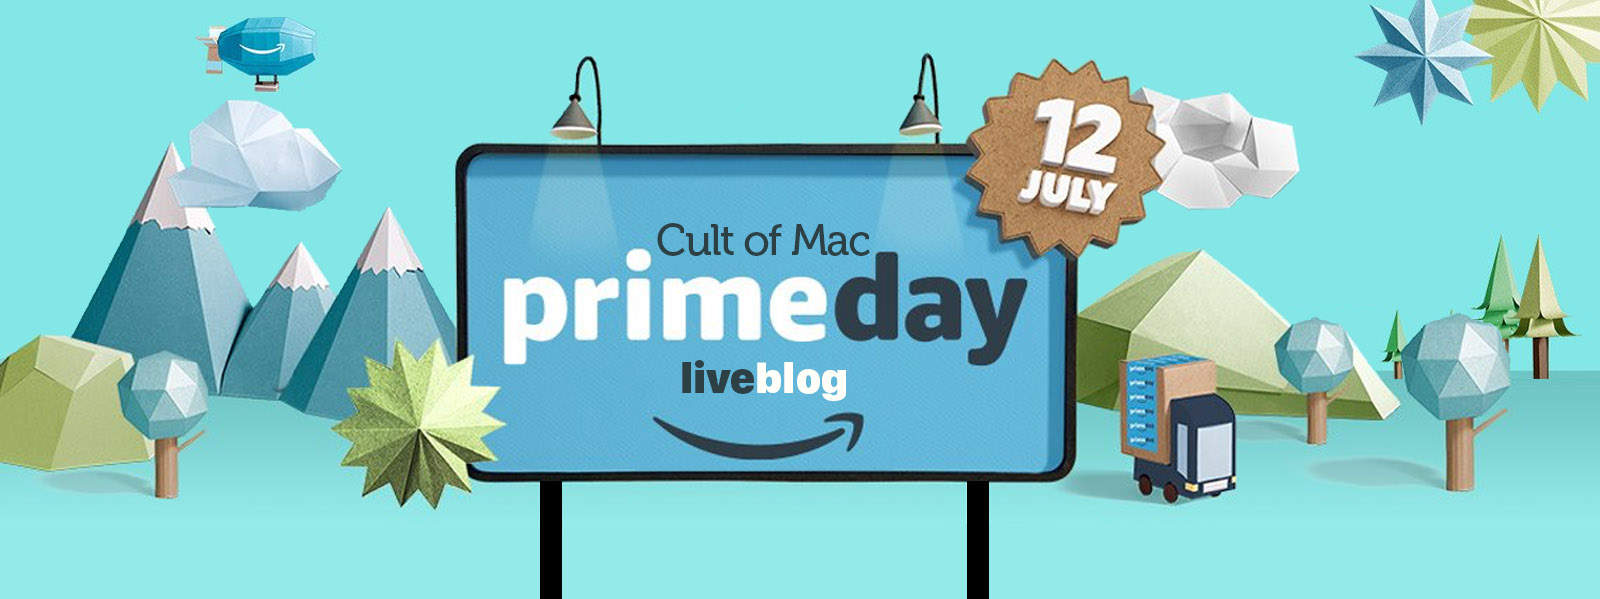 Grab Amazon Prime Day S Hottest Deals While They Last